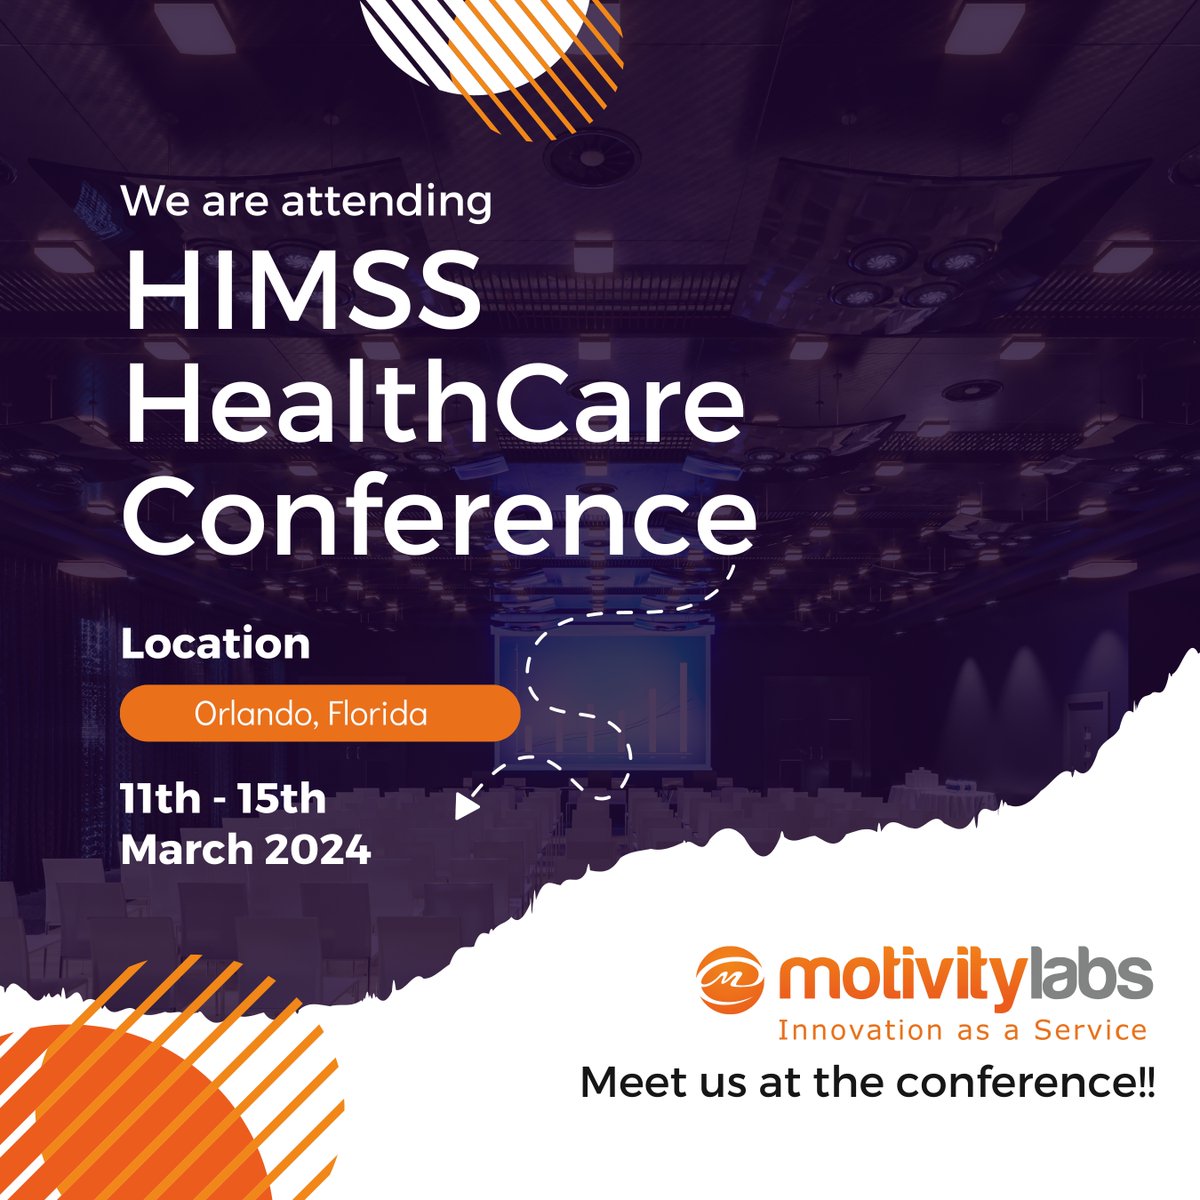 Exciting News from Motivity Labs at HIMSS Orlando! 
We're ready to dive into the latest healthcare technology trends and connect with industry leaders.
Reach out to us at info@motivitylabs.com

#MotivityAtHIMSS #HealthTechInnovation #HIMSSOrlando #digitalhealth